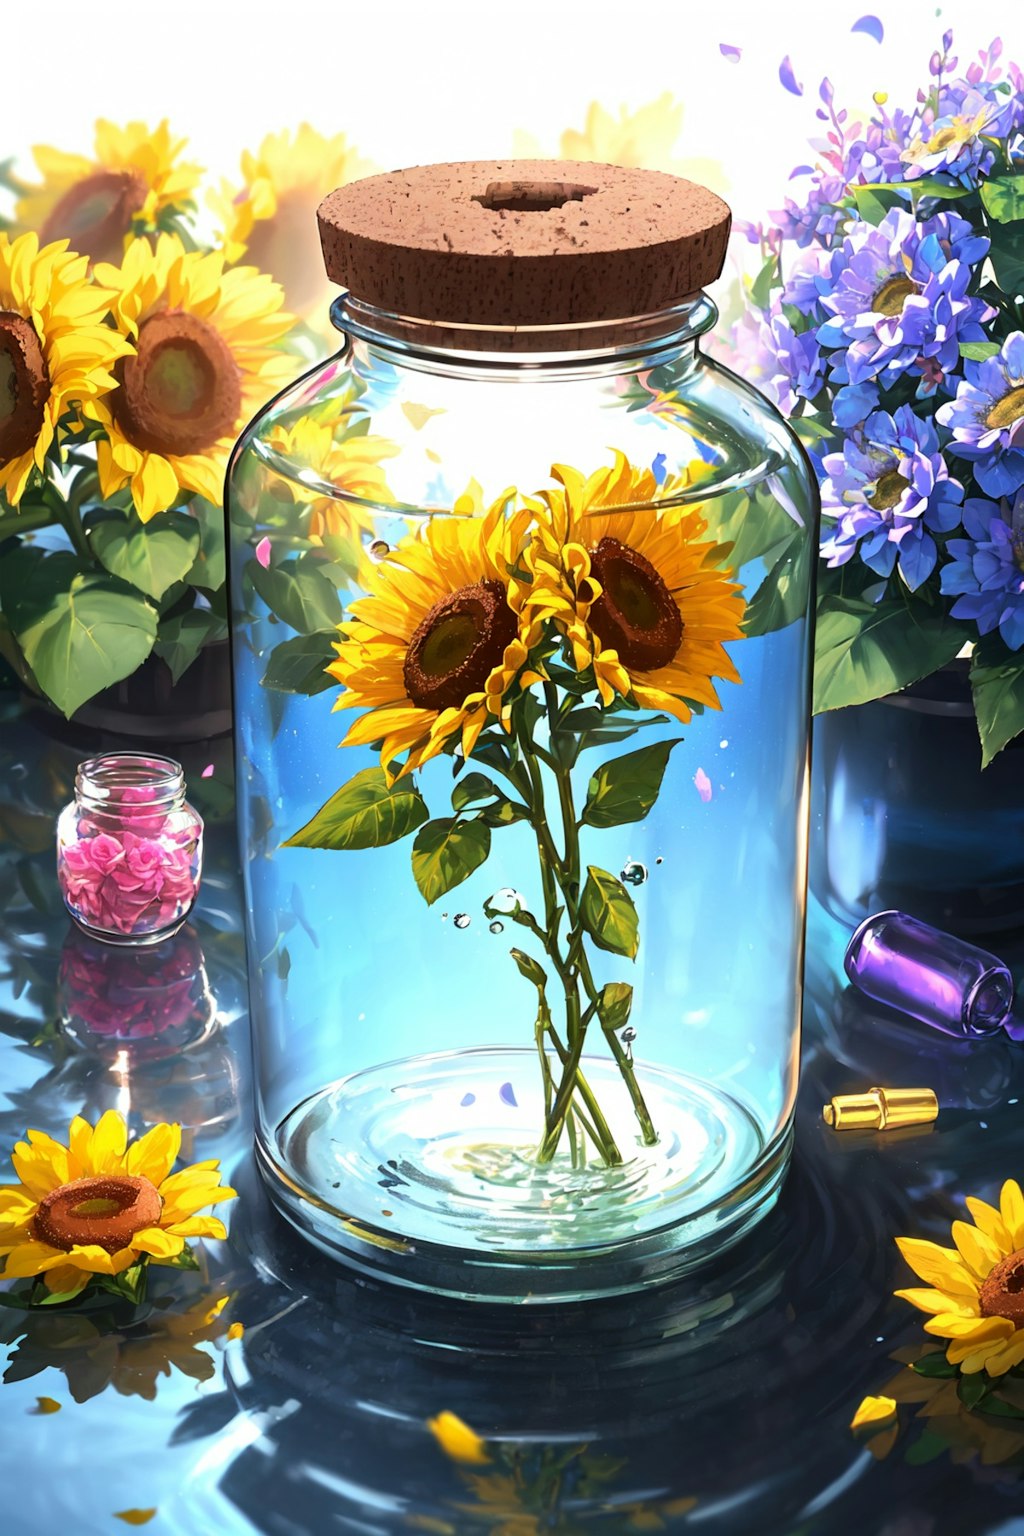 Sunflowers in a bottle for you.